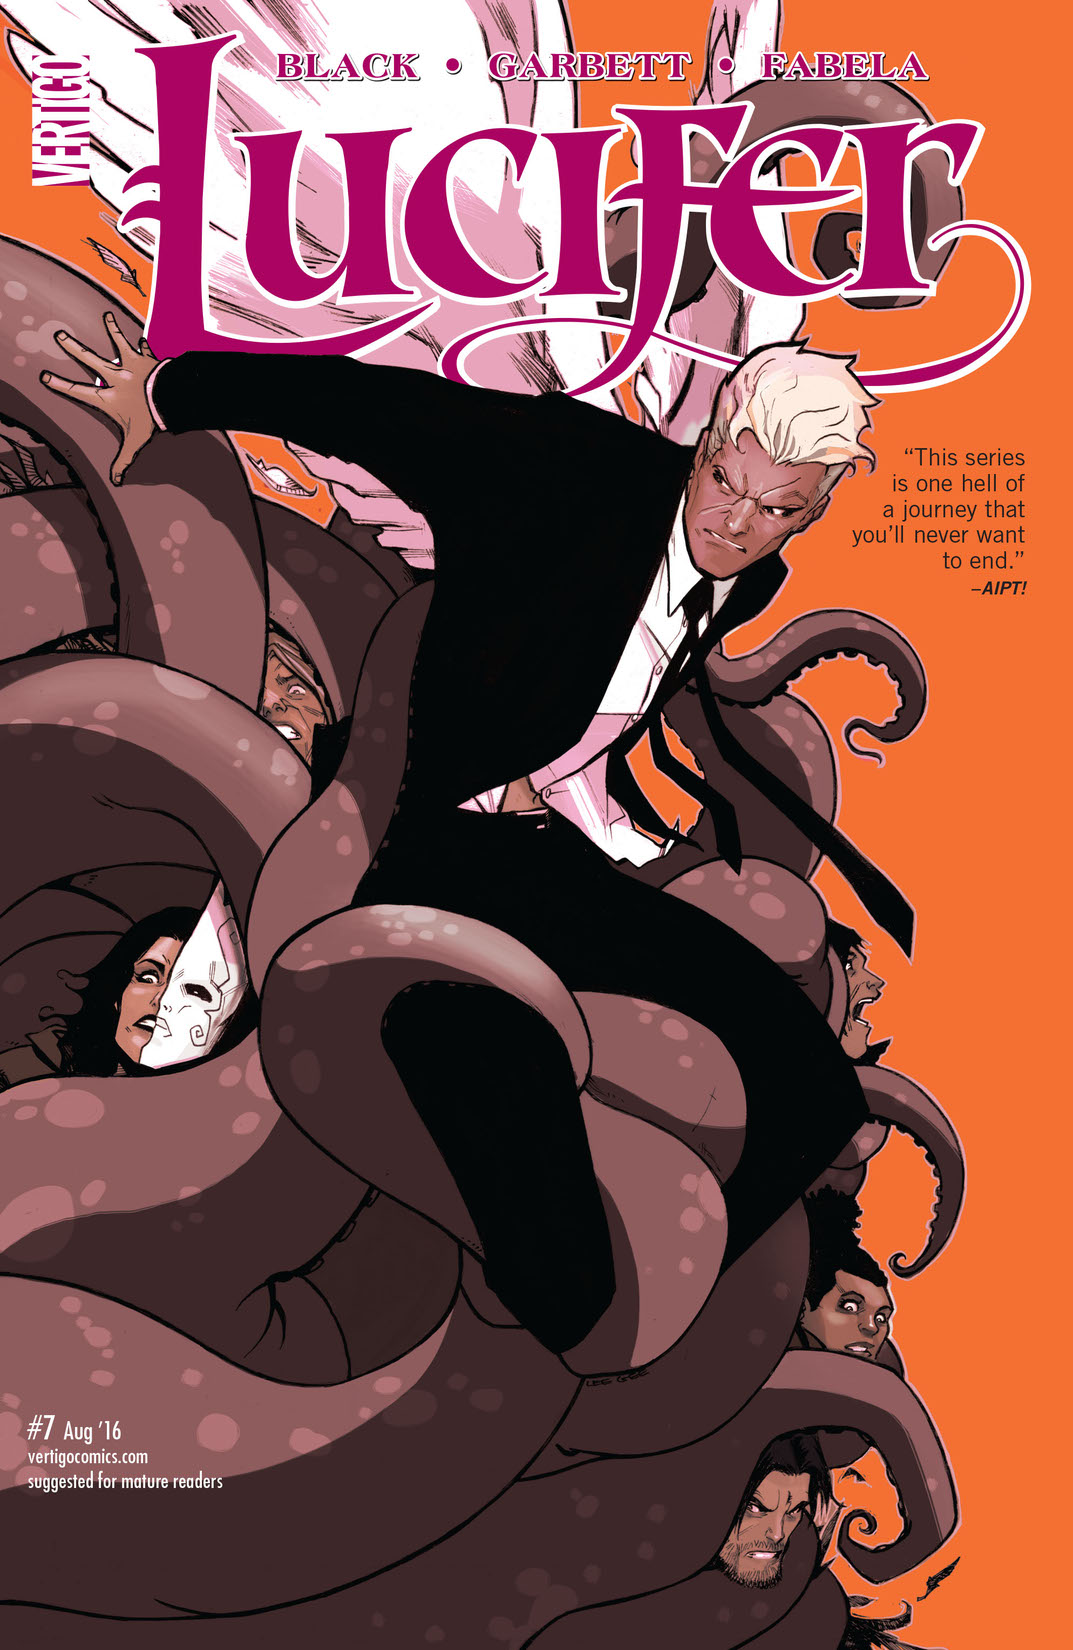 Lucifer (2015-) #7 preview images